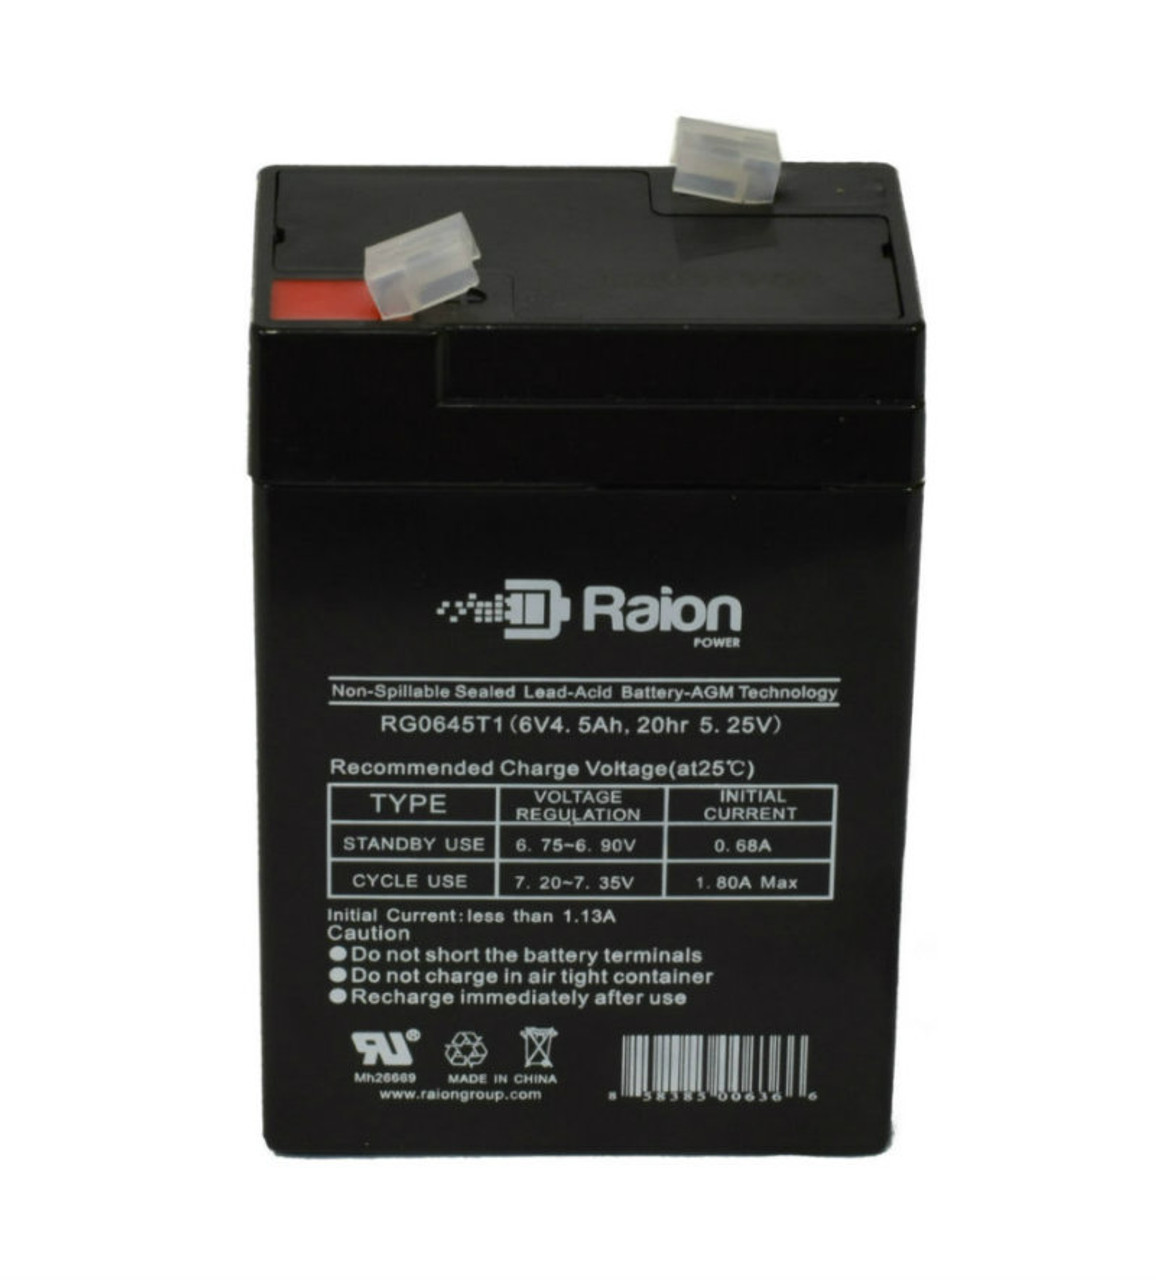 Raion Power RG0645T1 Replacement Battery Cartridge for XYC XT660